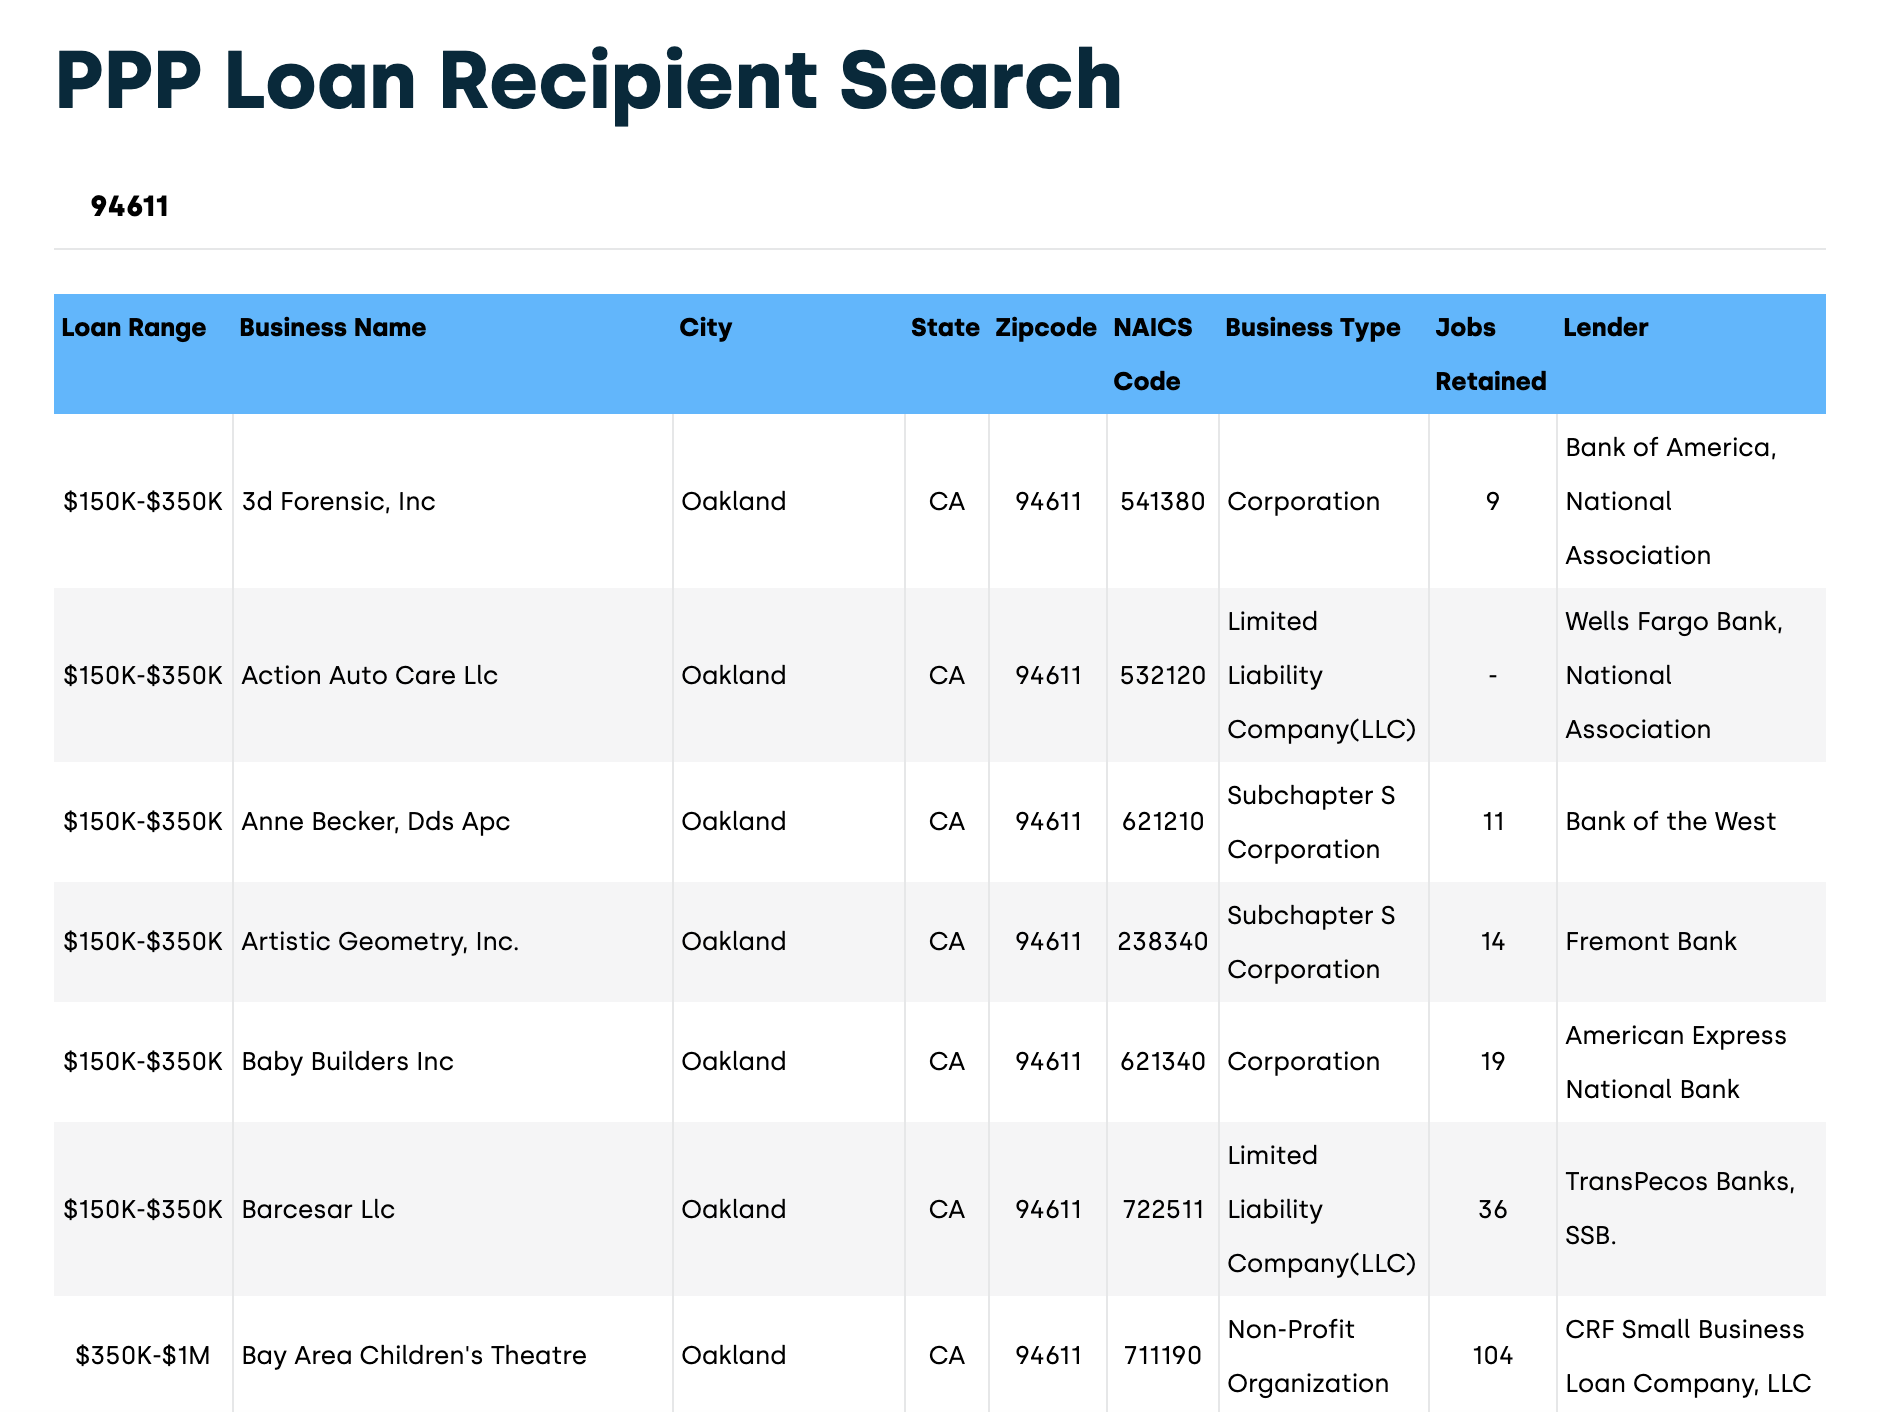 https://static.helloskip.com/blog/2021/05/PPP-loan-recipient-search.png